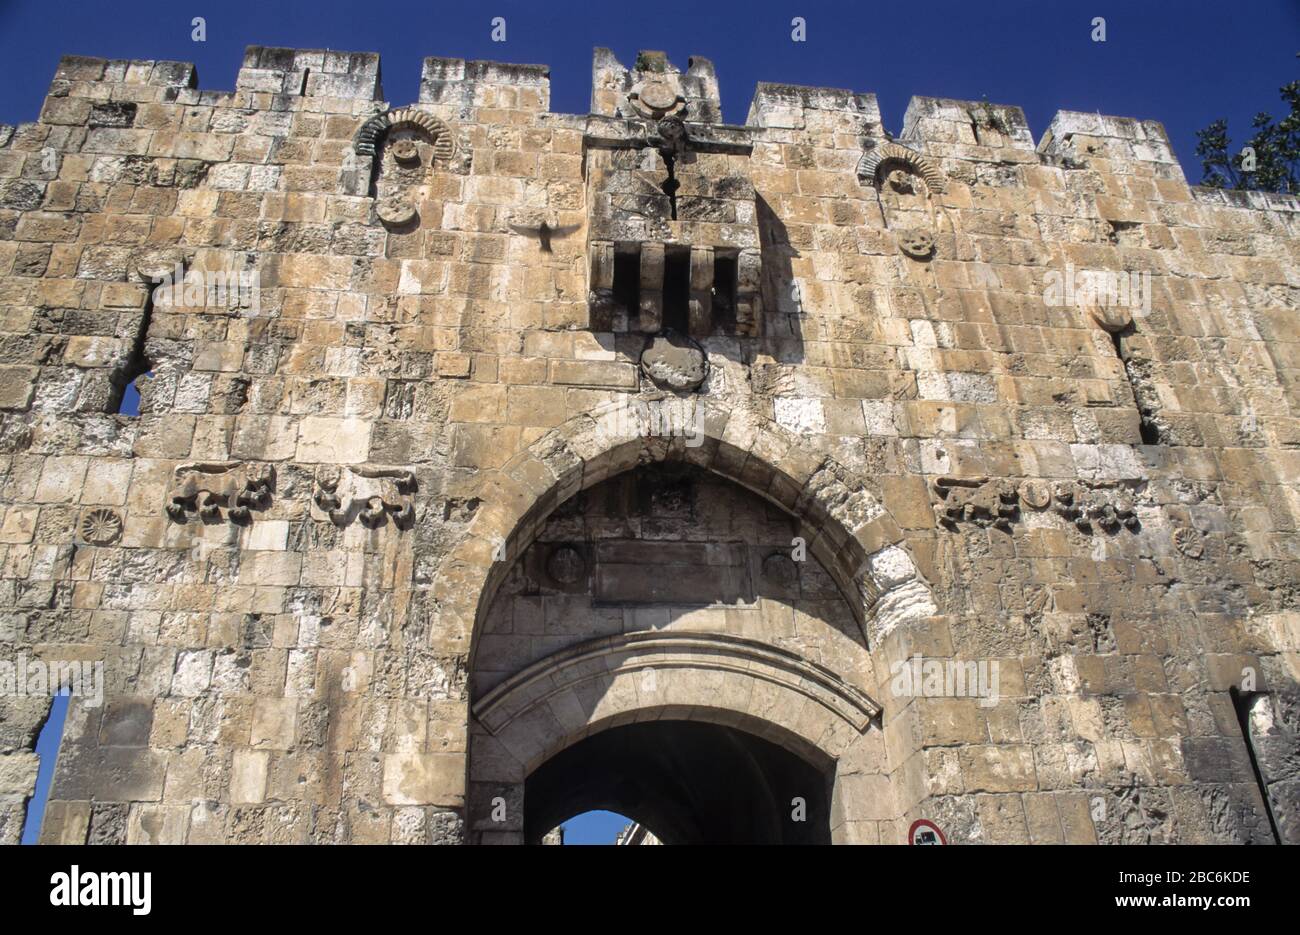 Lions' Gate (also St. Stephen's Gate or Sheep Gate) is a gate in the walls of the Old City in Jerusalem. It is one of seven open gates in the Old City Stock Photo